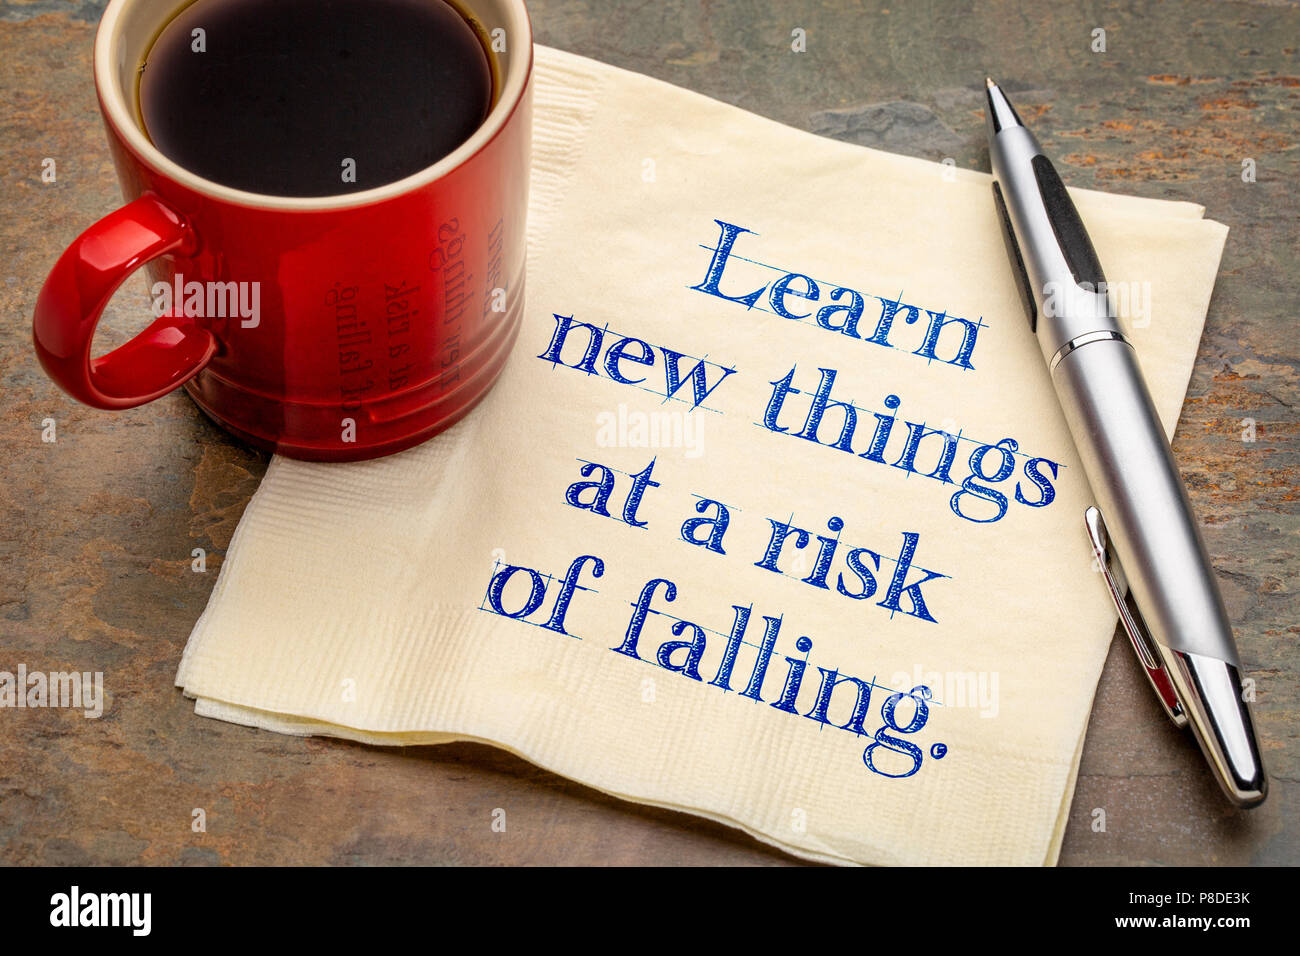 Learn new things at a risk of falling - handwriting on a napkin with a cup of coffee Stock Photo